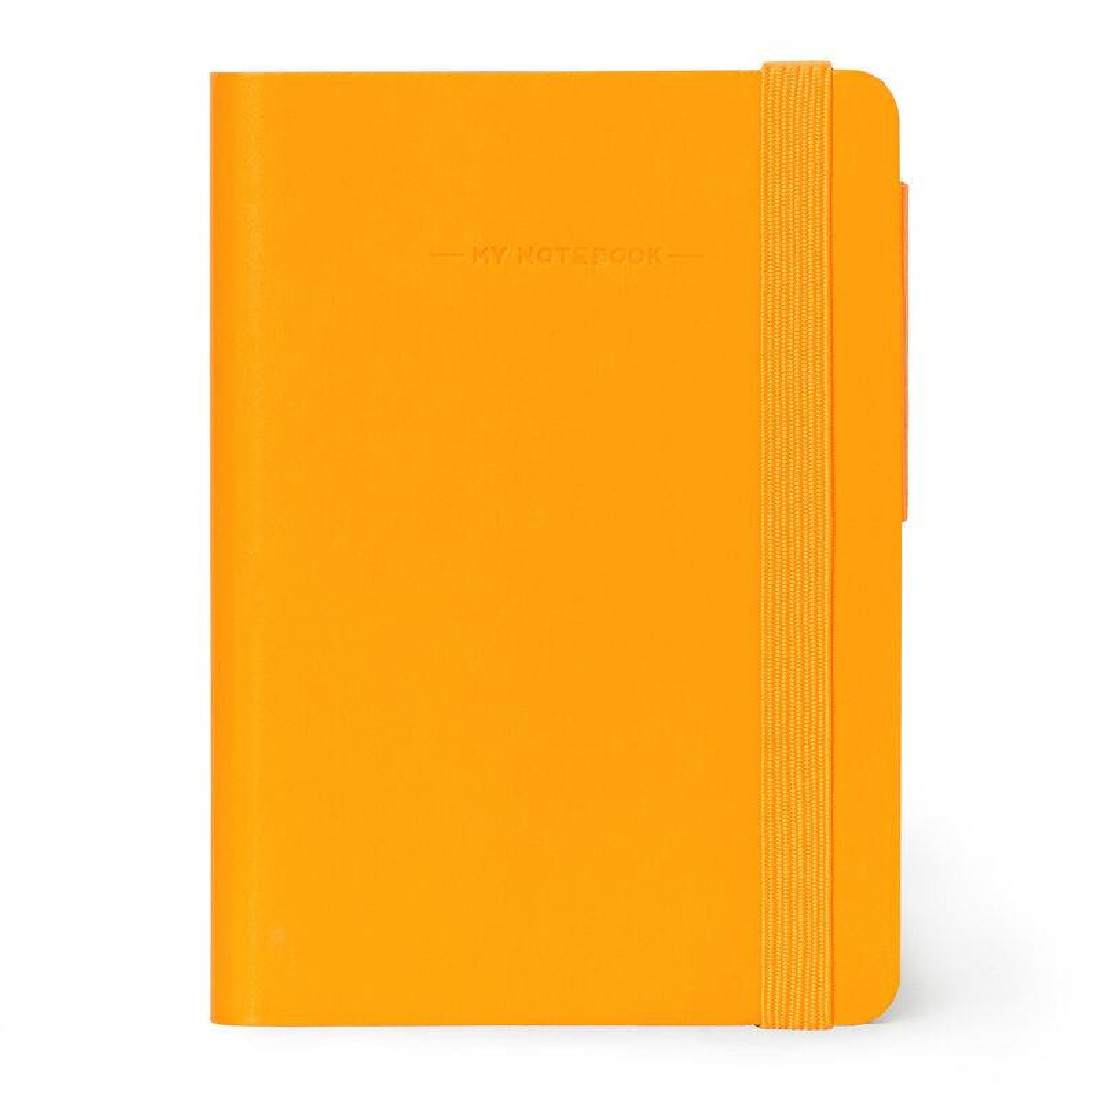 My Notebook - Lined - Small - Mango Cover LEGAMI